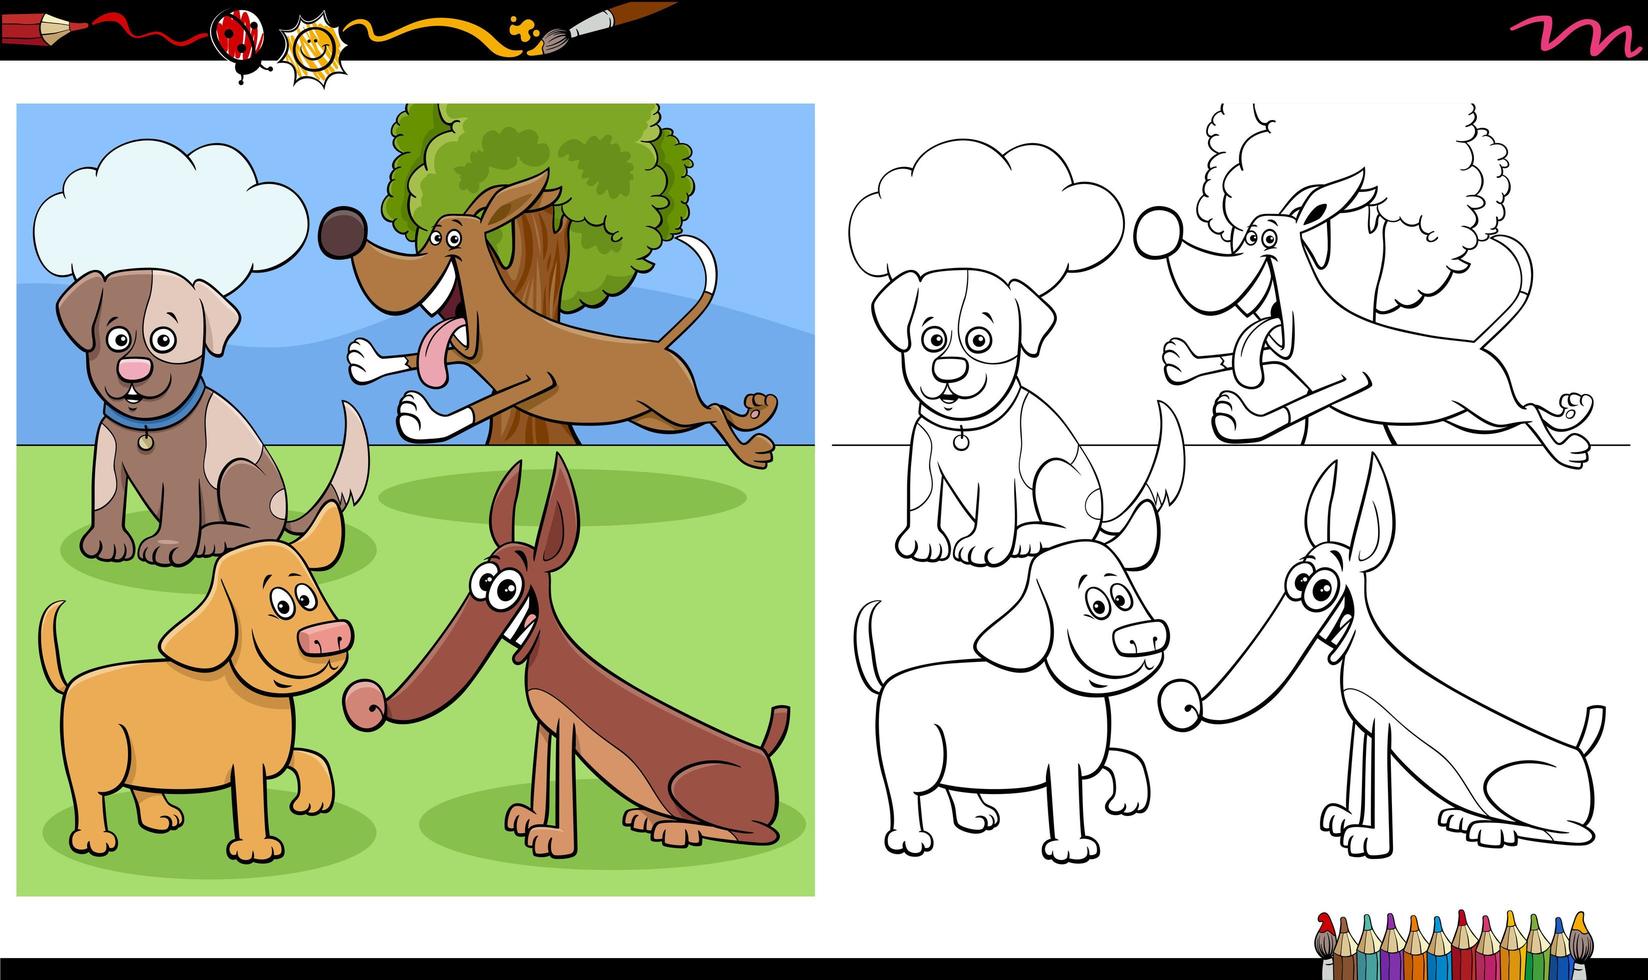 Dogs and puppies characters group coloring book page vector